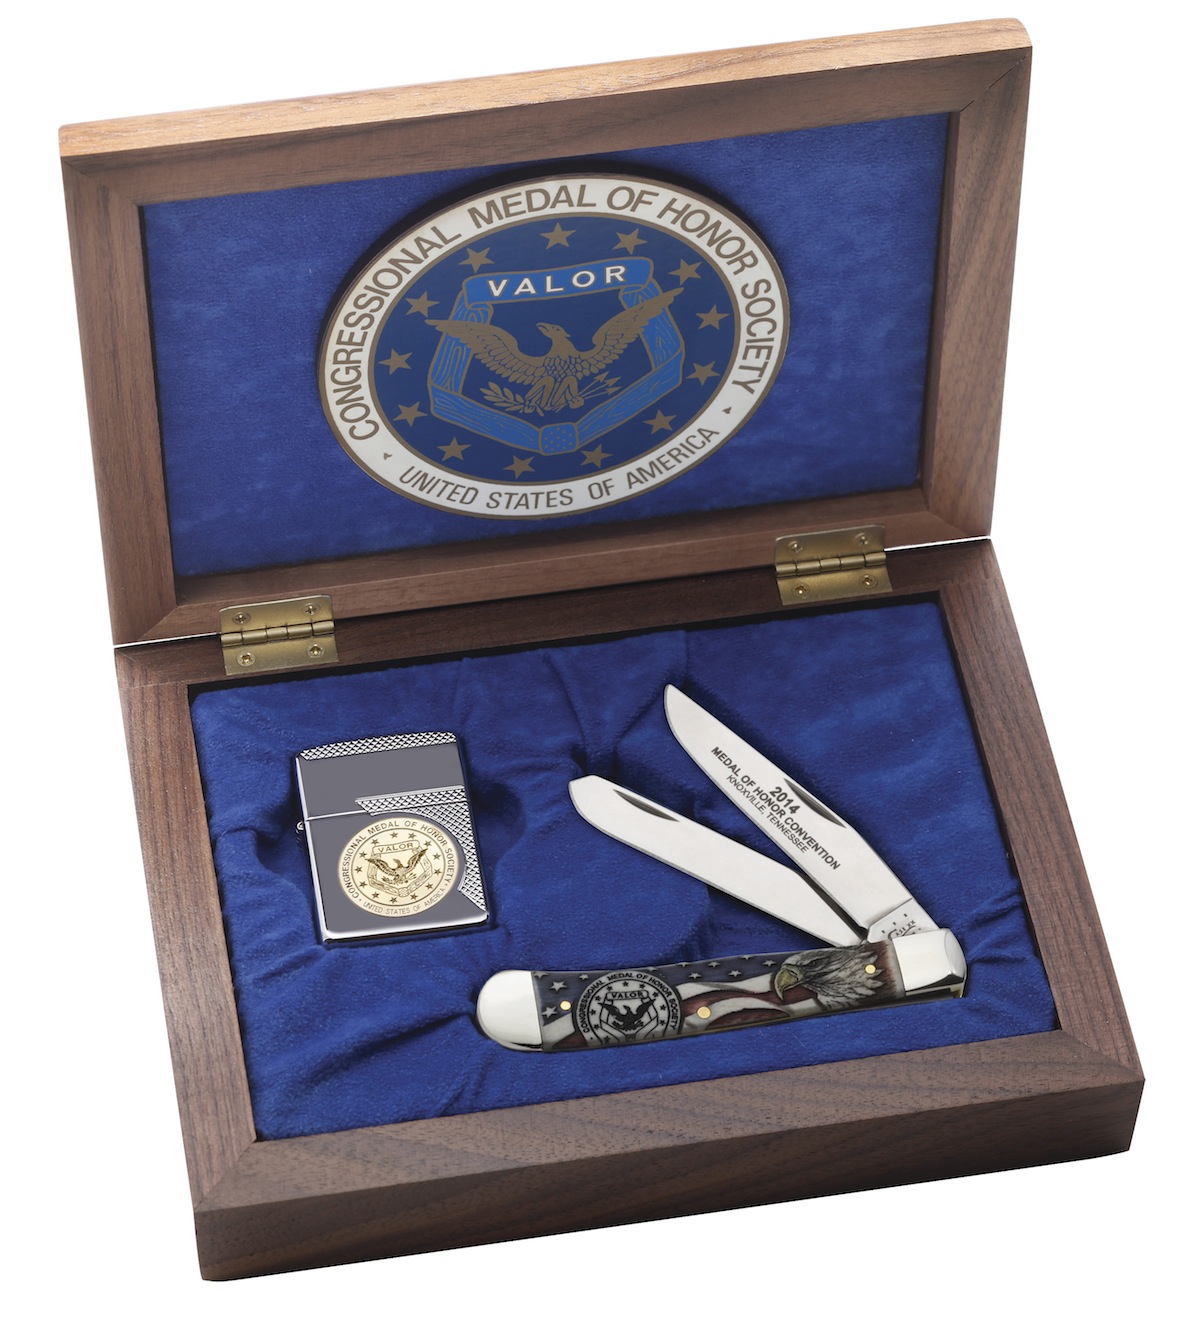 Case and Zippo are presenting a special knife/lighter set to MOH awardees on the anniversary of 9/11.